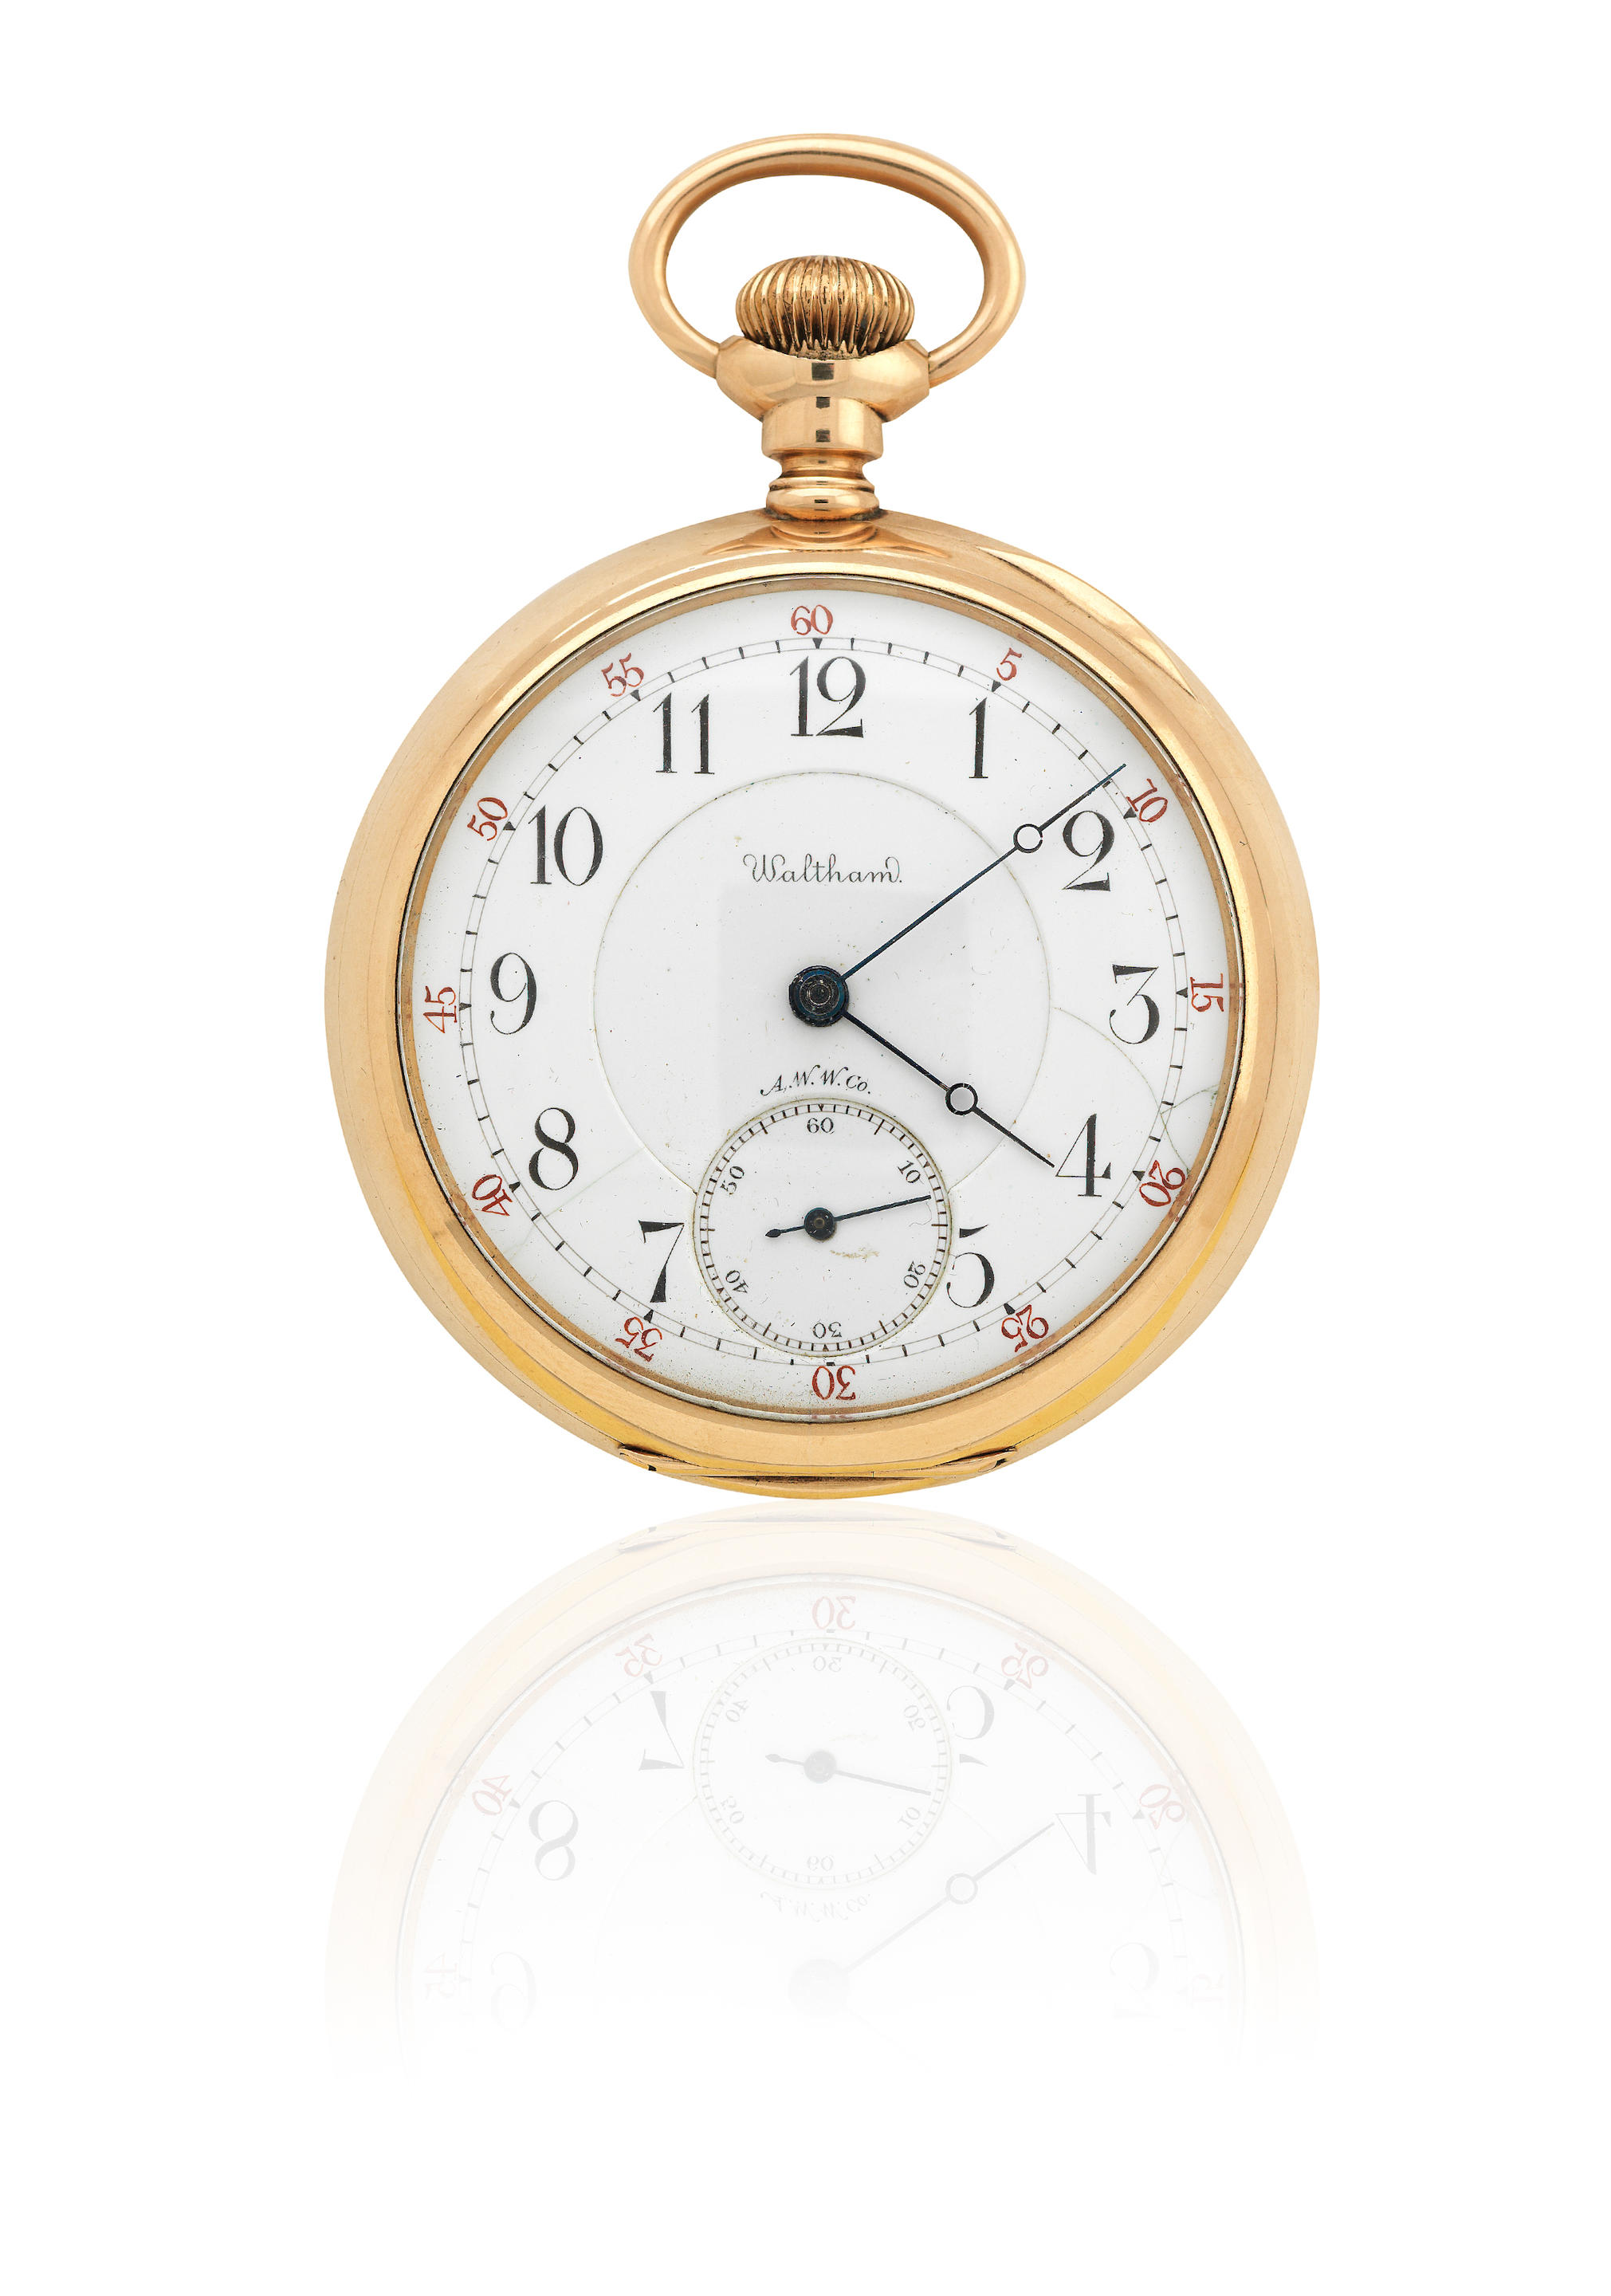 A 14ct gold Waltham open faced pocket watch